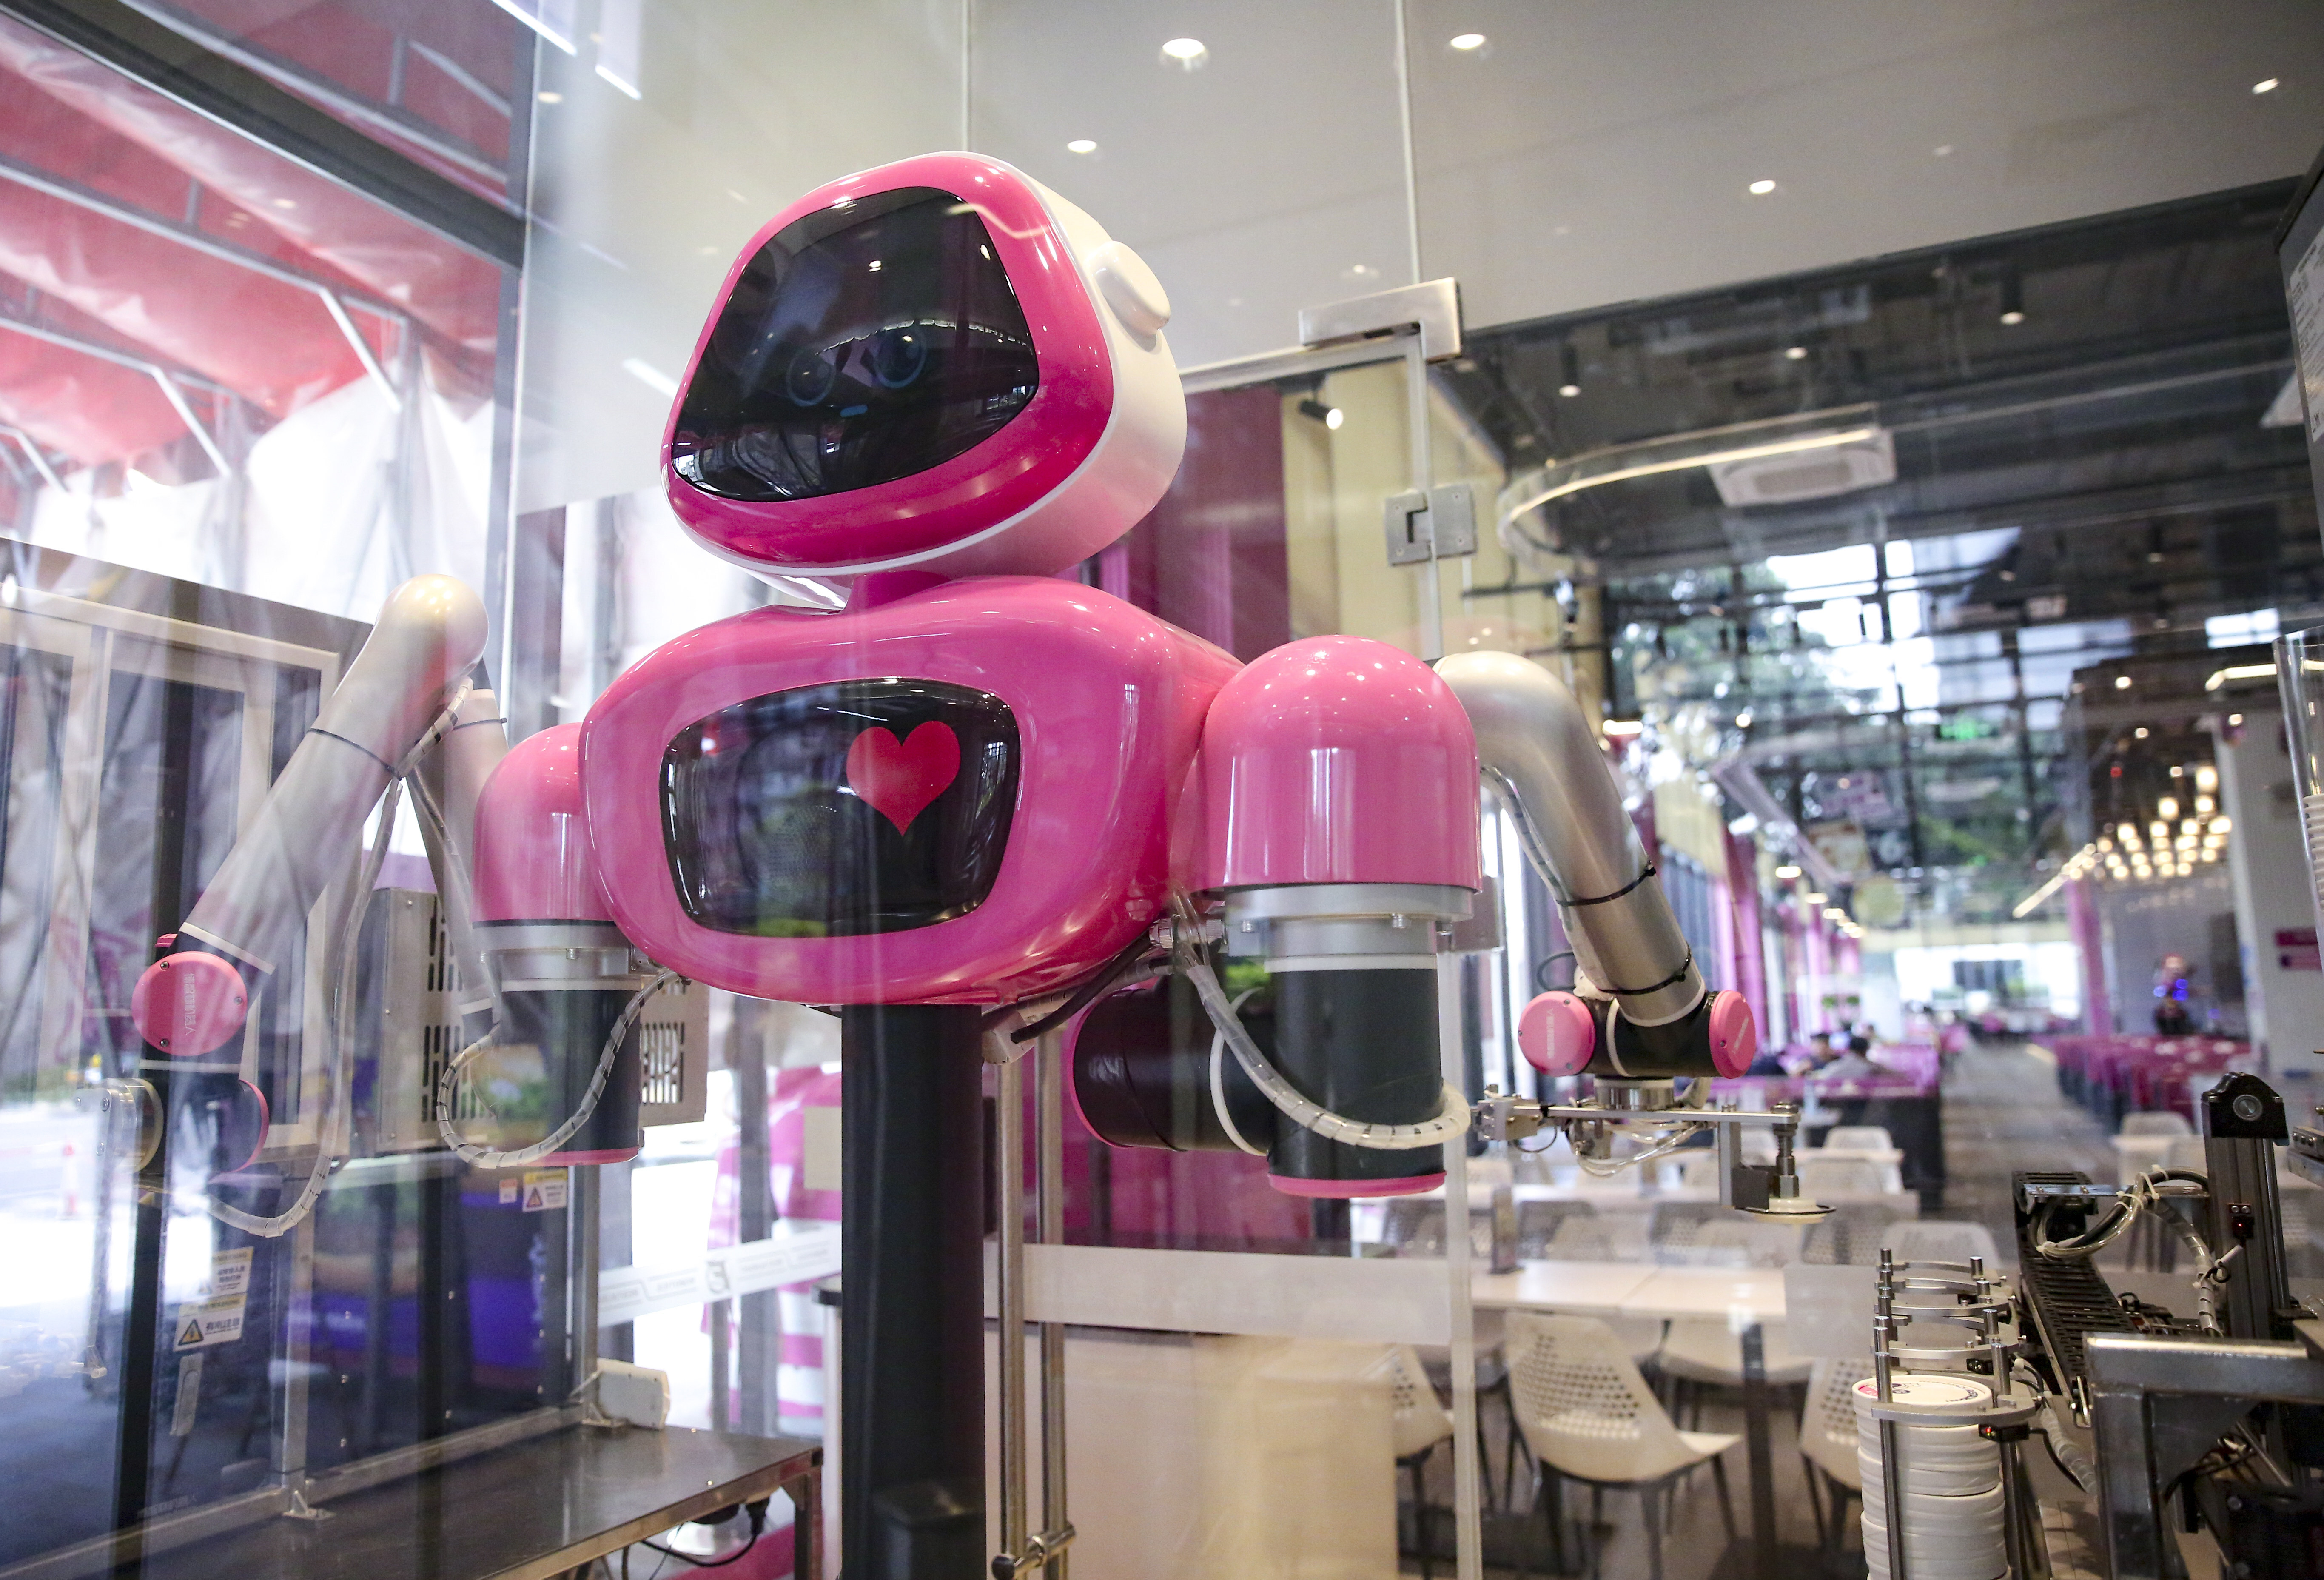 The Foodom Skyfall Food Kingdom Robot Restaurant in Shunde district, Foshan, uses robots from Qianxi Robotics Group. Photo: Iris Ouyang